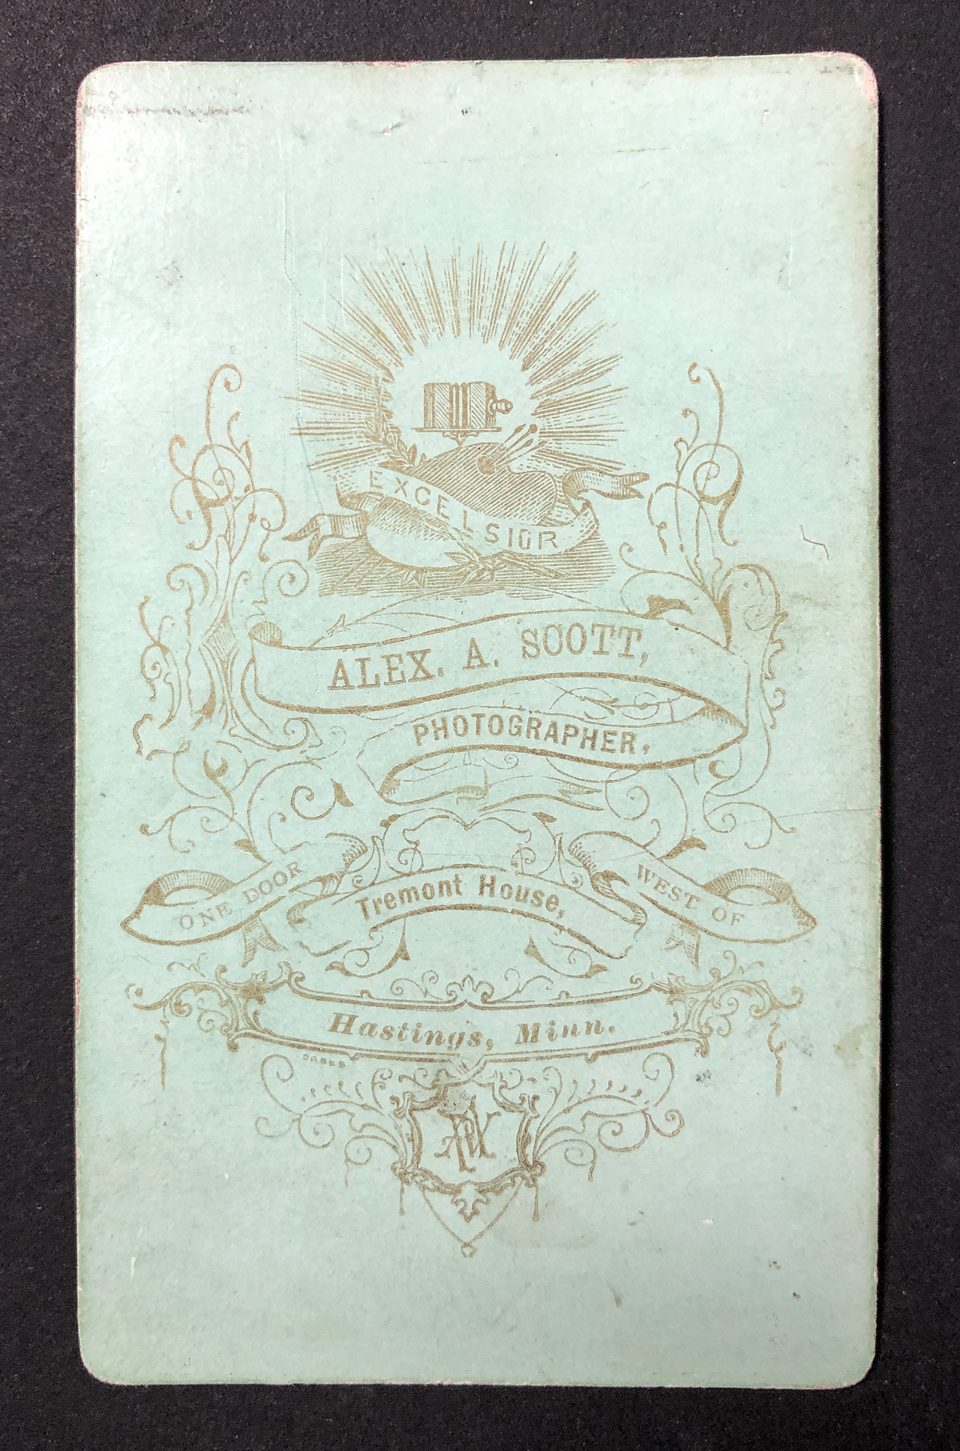 The back of this carte de visite is printed with gold ink on a robin's egg blue paper surface. It says "Excelsior. Alex A. Scott, photographer, One door west of Tremont House, Hastings, Minn."